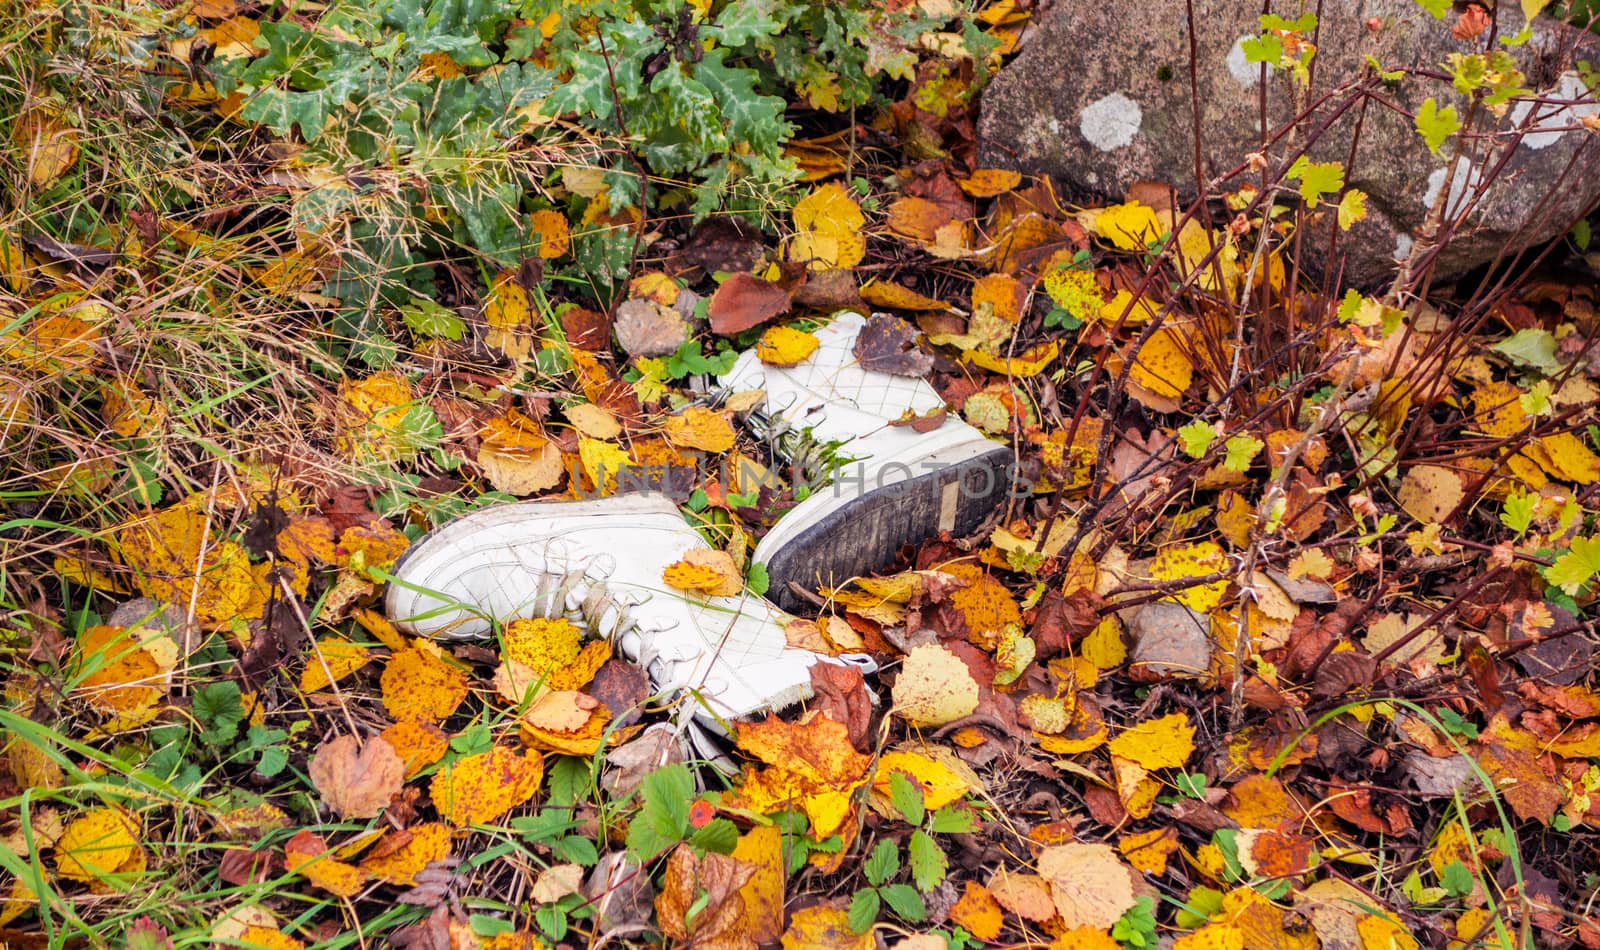 Discarded White boots